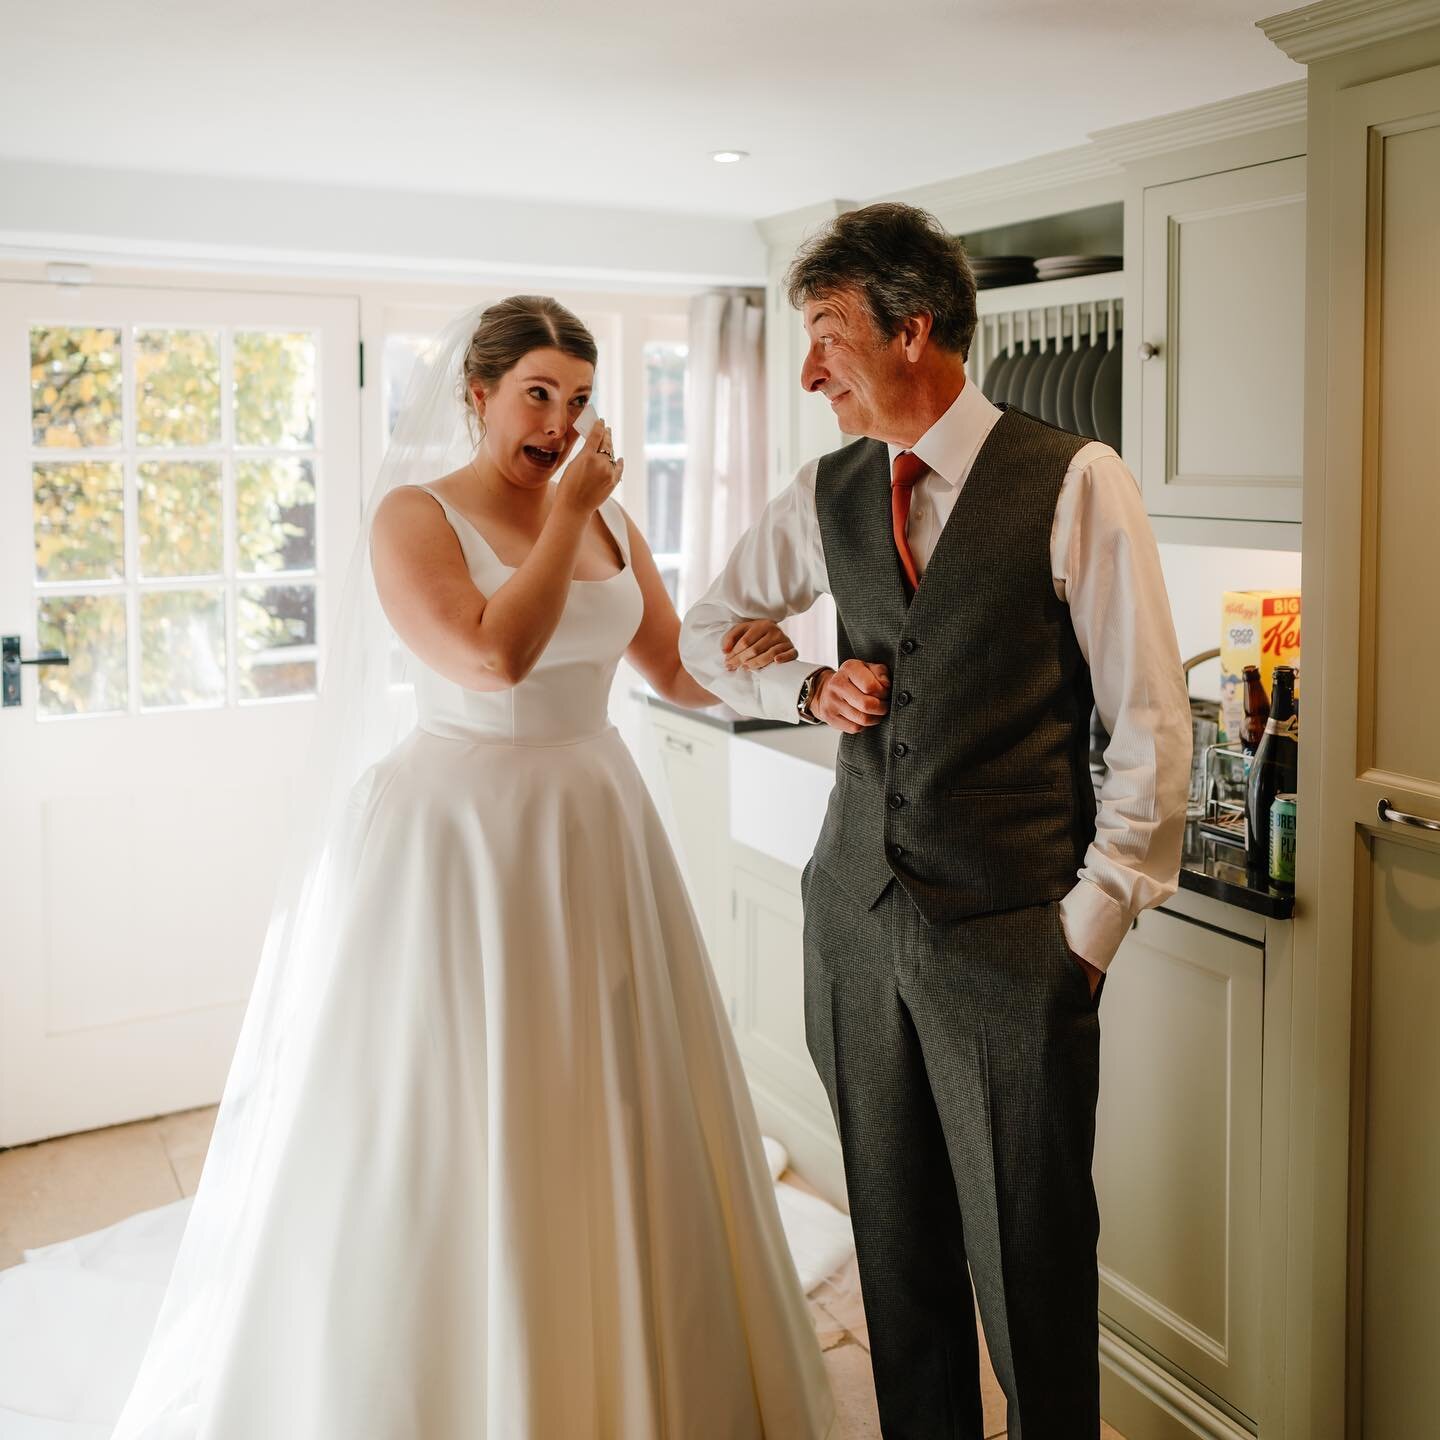 Making time for the emotional moments, sometimes they catch up off guard and sometimes you need to make space for them.

Imogen had a little bit of time to spare before heading to ceremony &amp; decided to do a dress reveal with her dad&hellip; and I